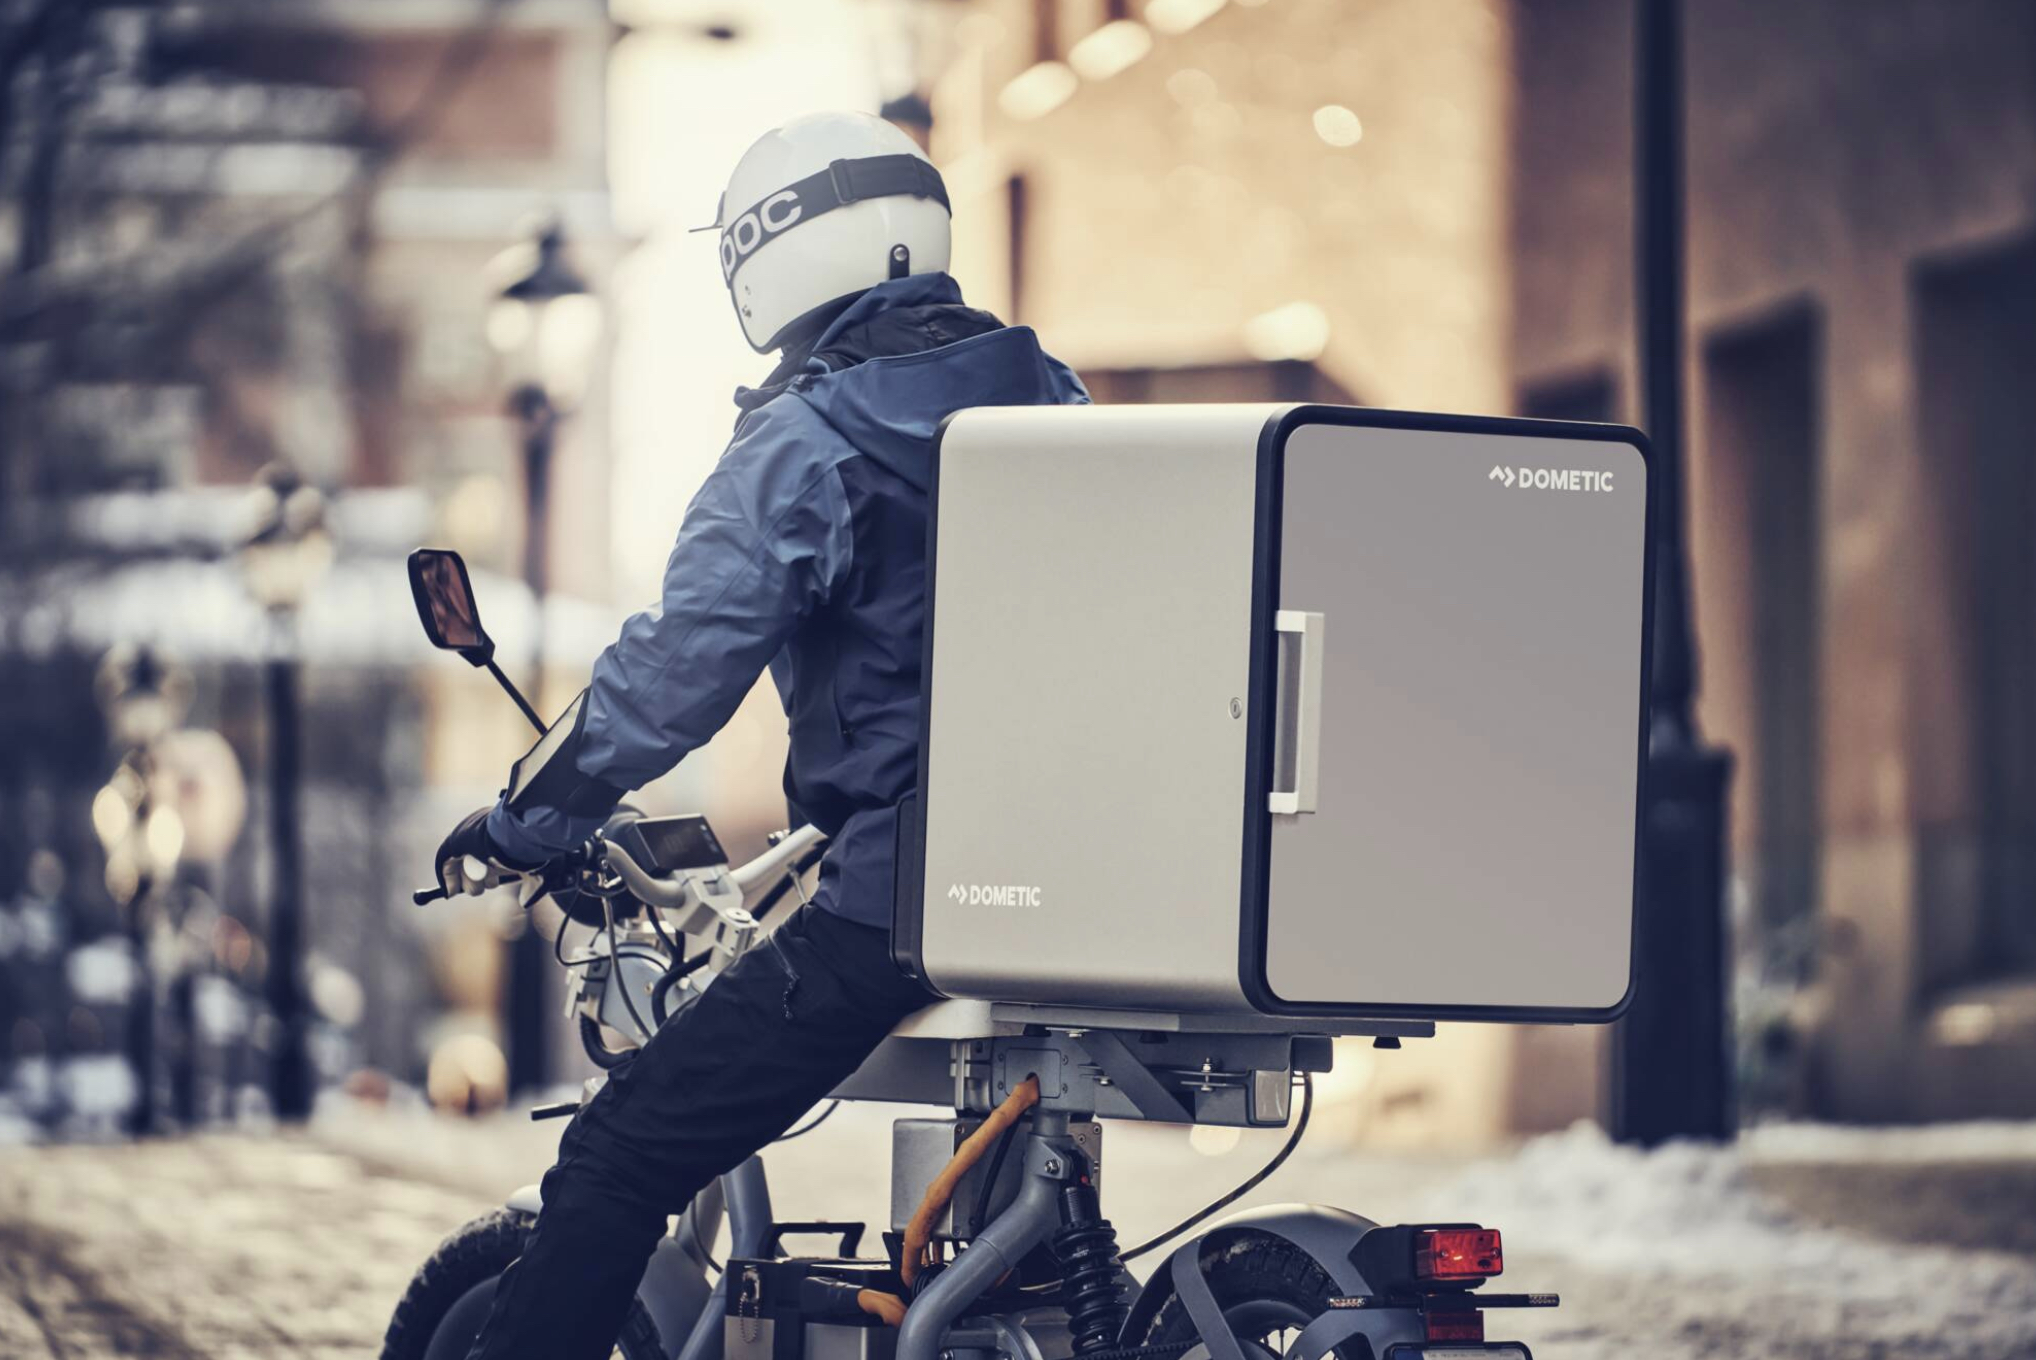 Dometic's revolutionary DeliBox is designed to preserve the quality and temperature of food or other perishables seamlessly throughout the delivery process. Photo courtesy of Dometic.